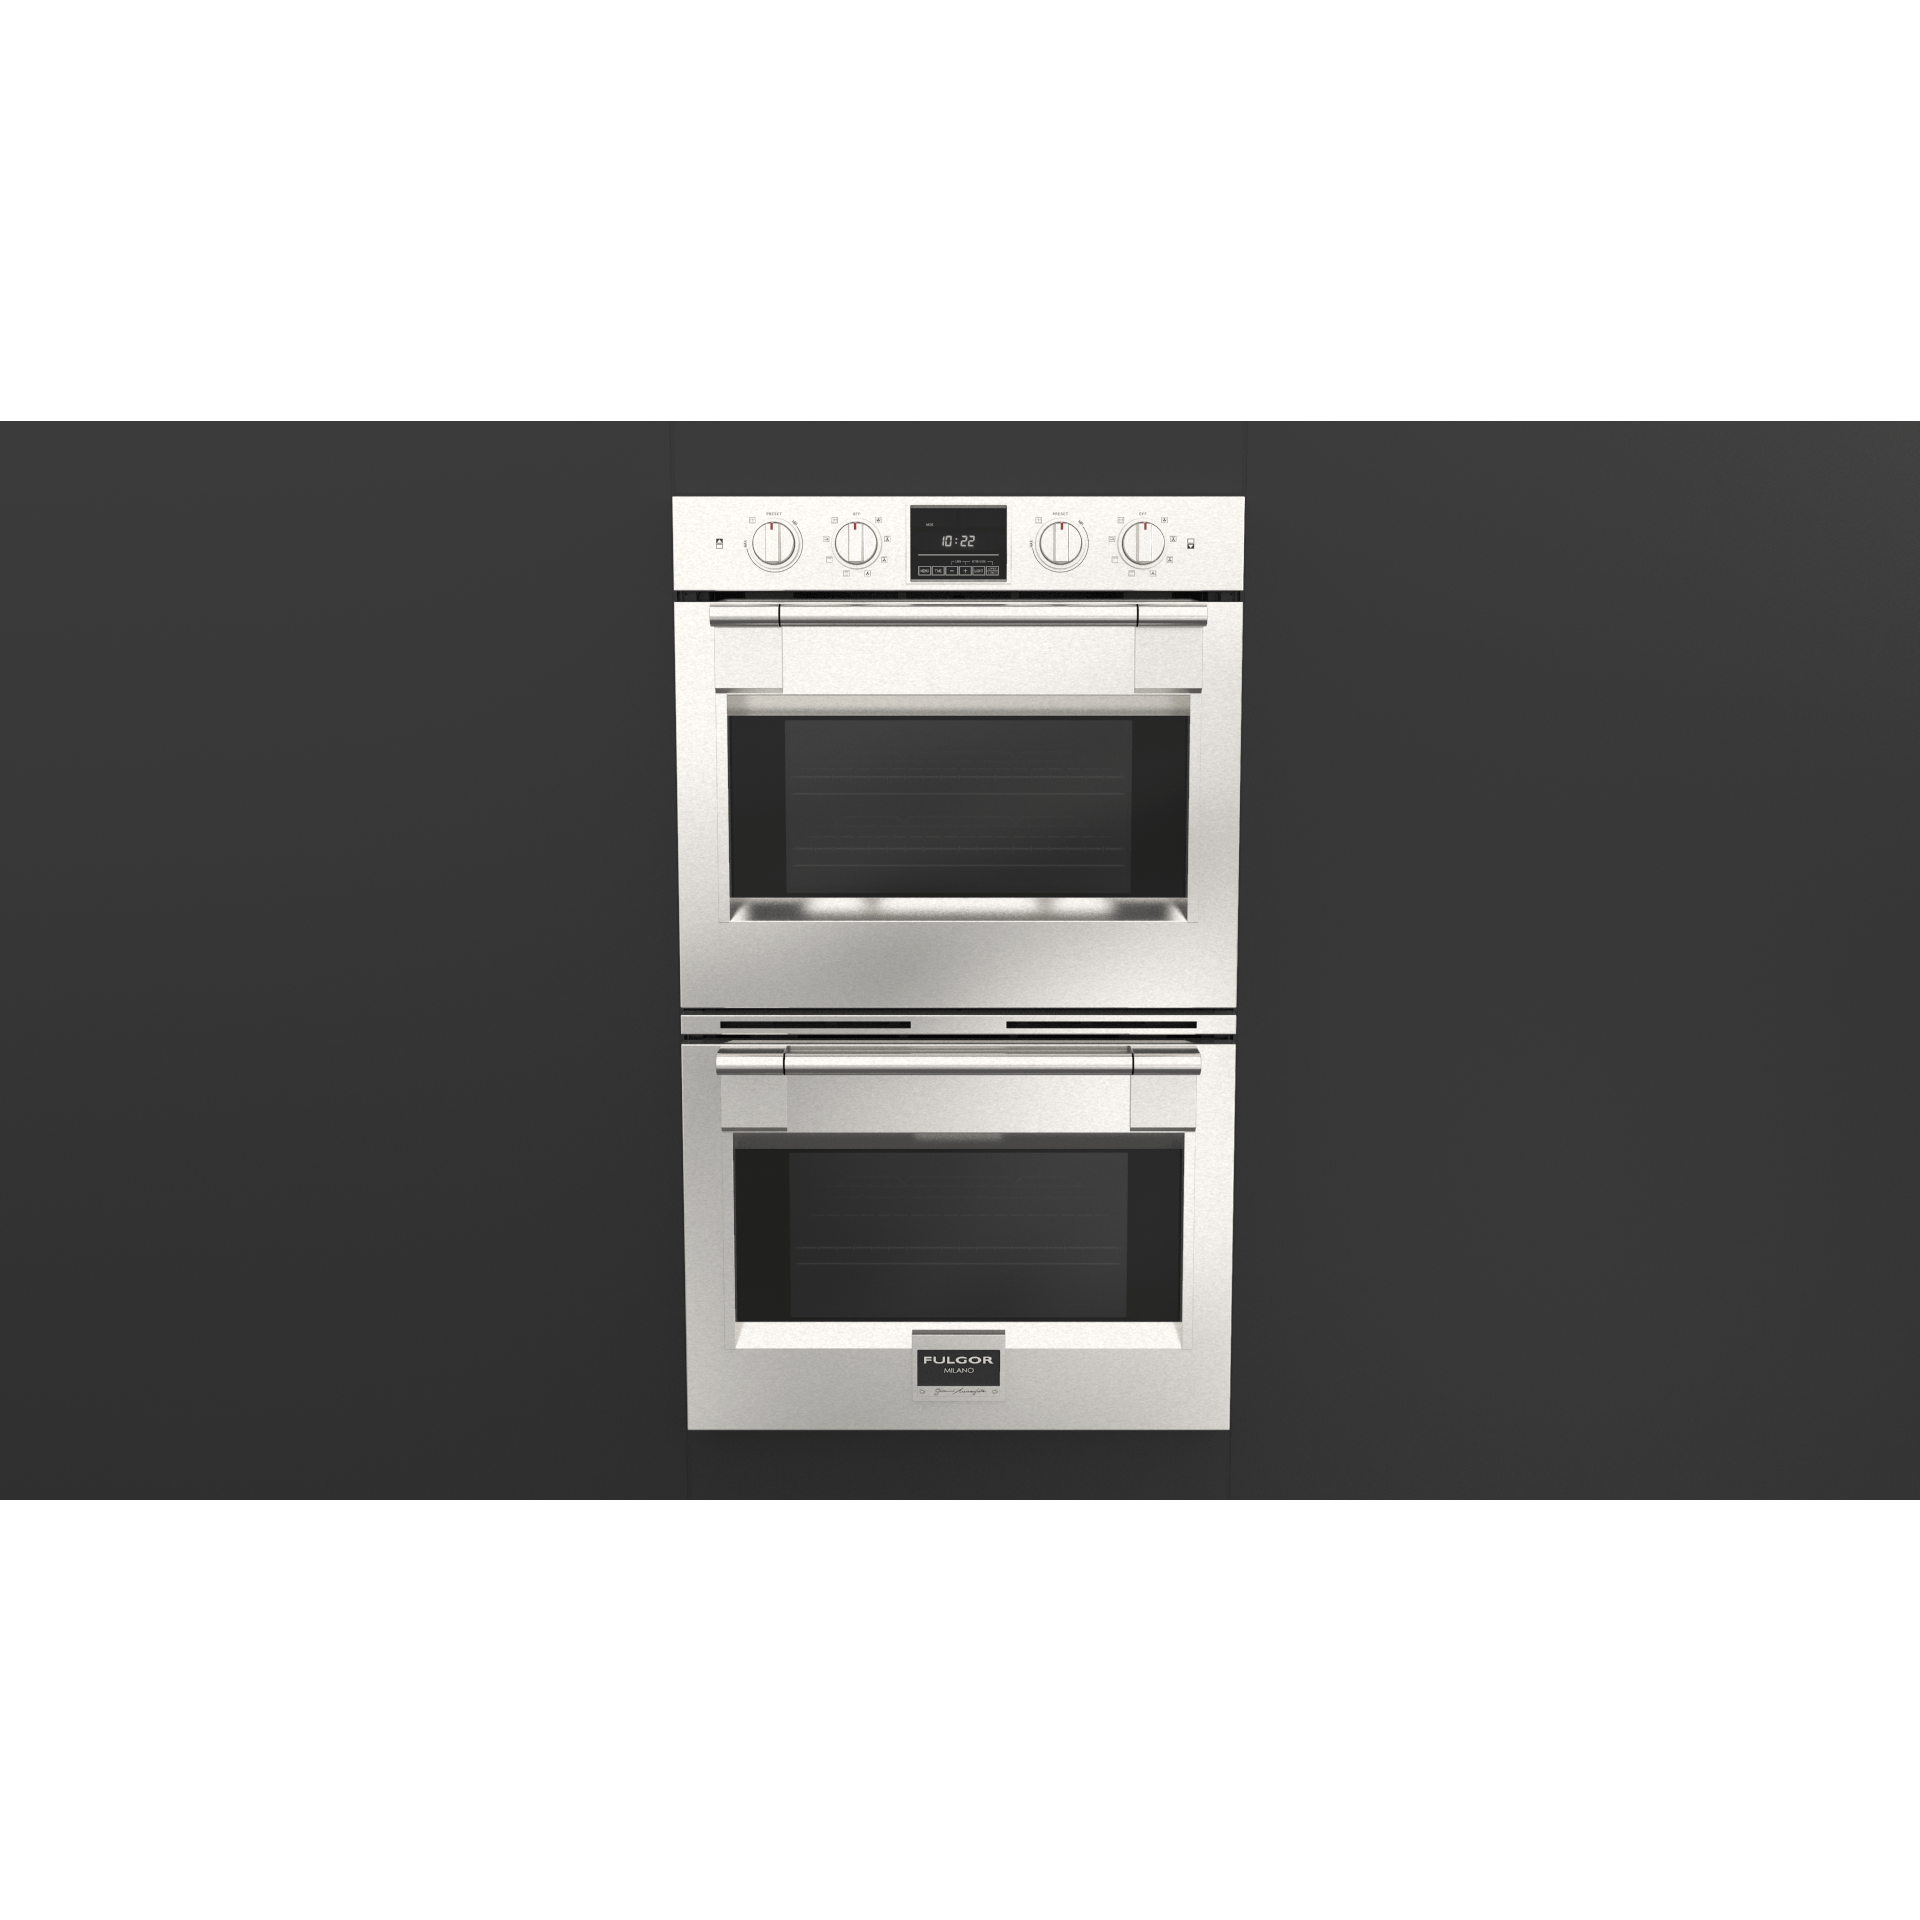 Fulgor Milano Package 30" Double Electric Wall Oven, 36" French Door Refrigerator, 36" Gas Rangetop, 36" Wall Mount Hood and 24" Integrated Built-In Dishwasher Wall Oven F6PDP30S1F6GRT366S1 Luxury Appliances Direct